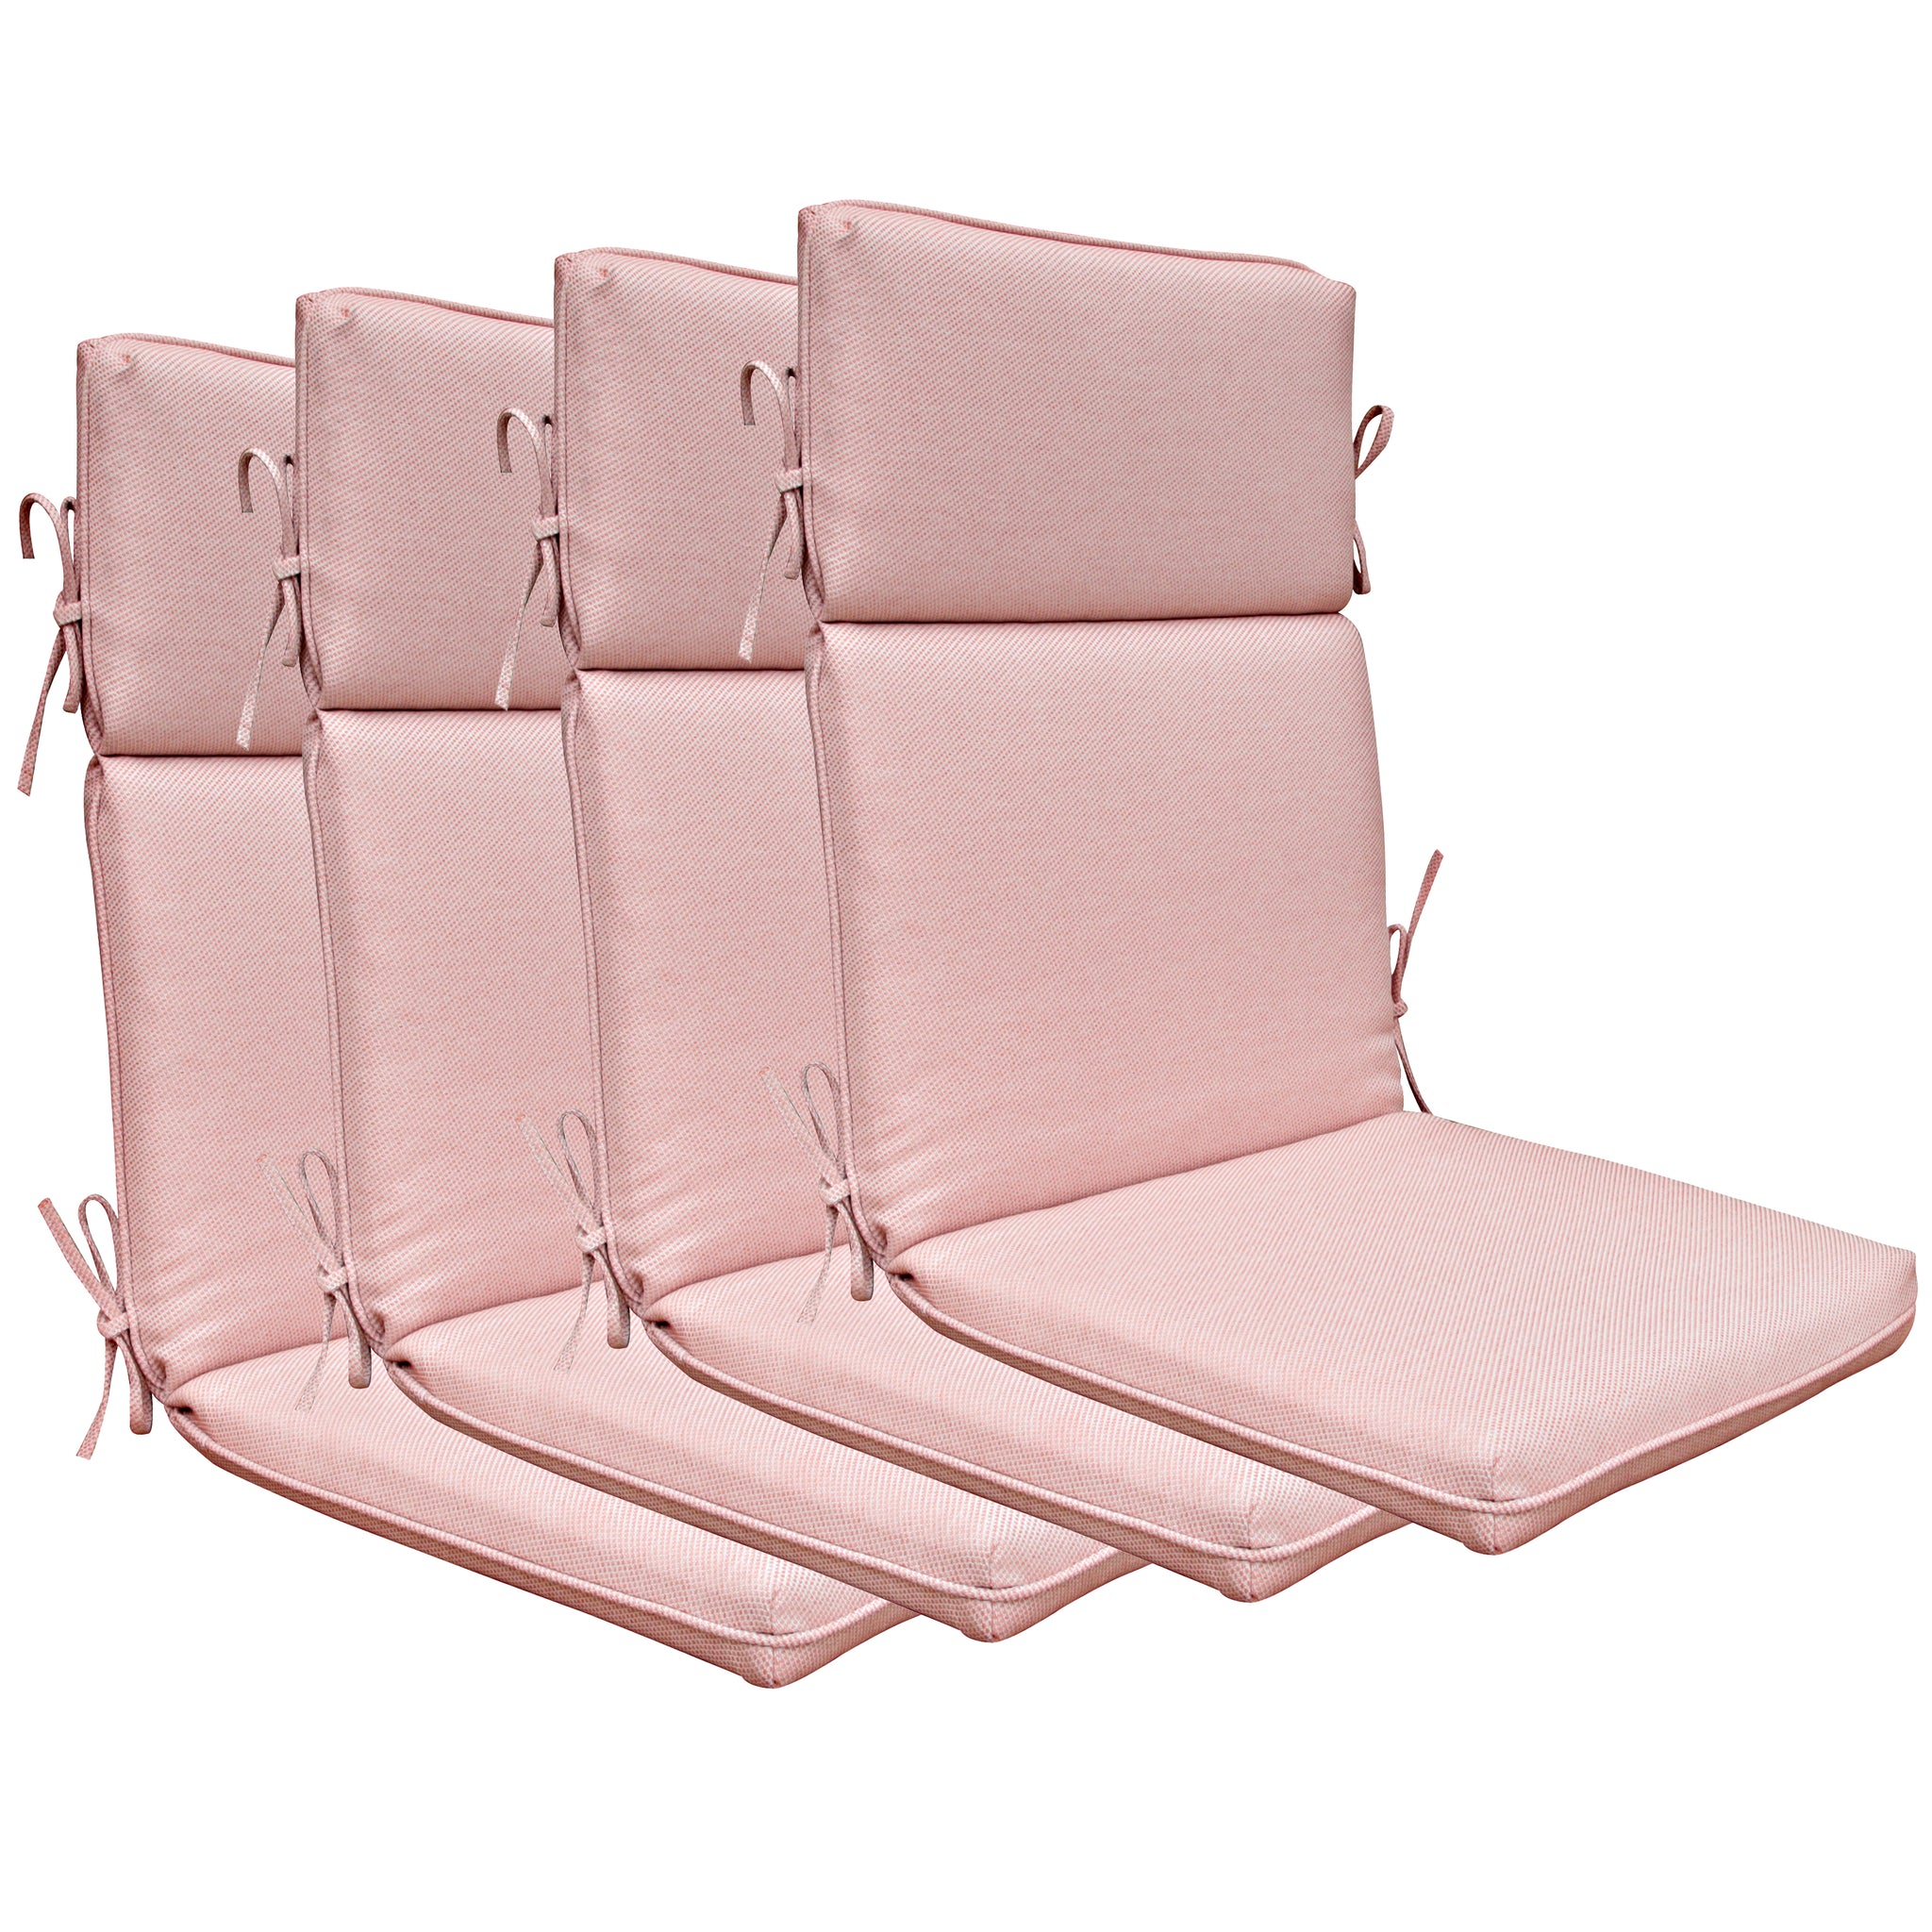 Indoor Outdoor High Back Chair Cushions Set of 4 Mixed Coral/White